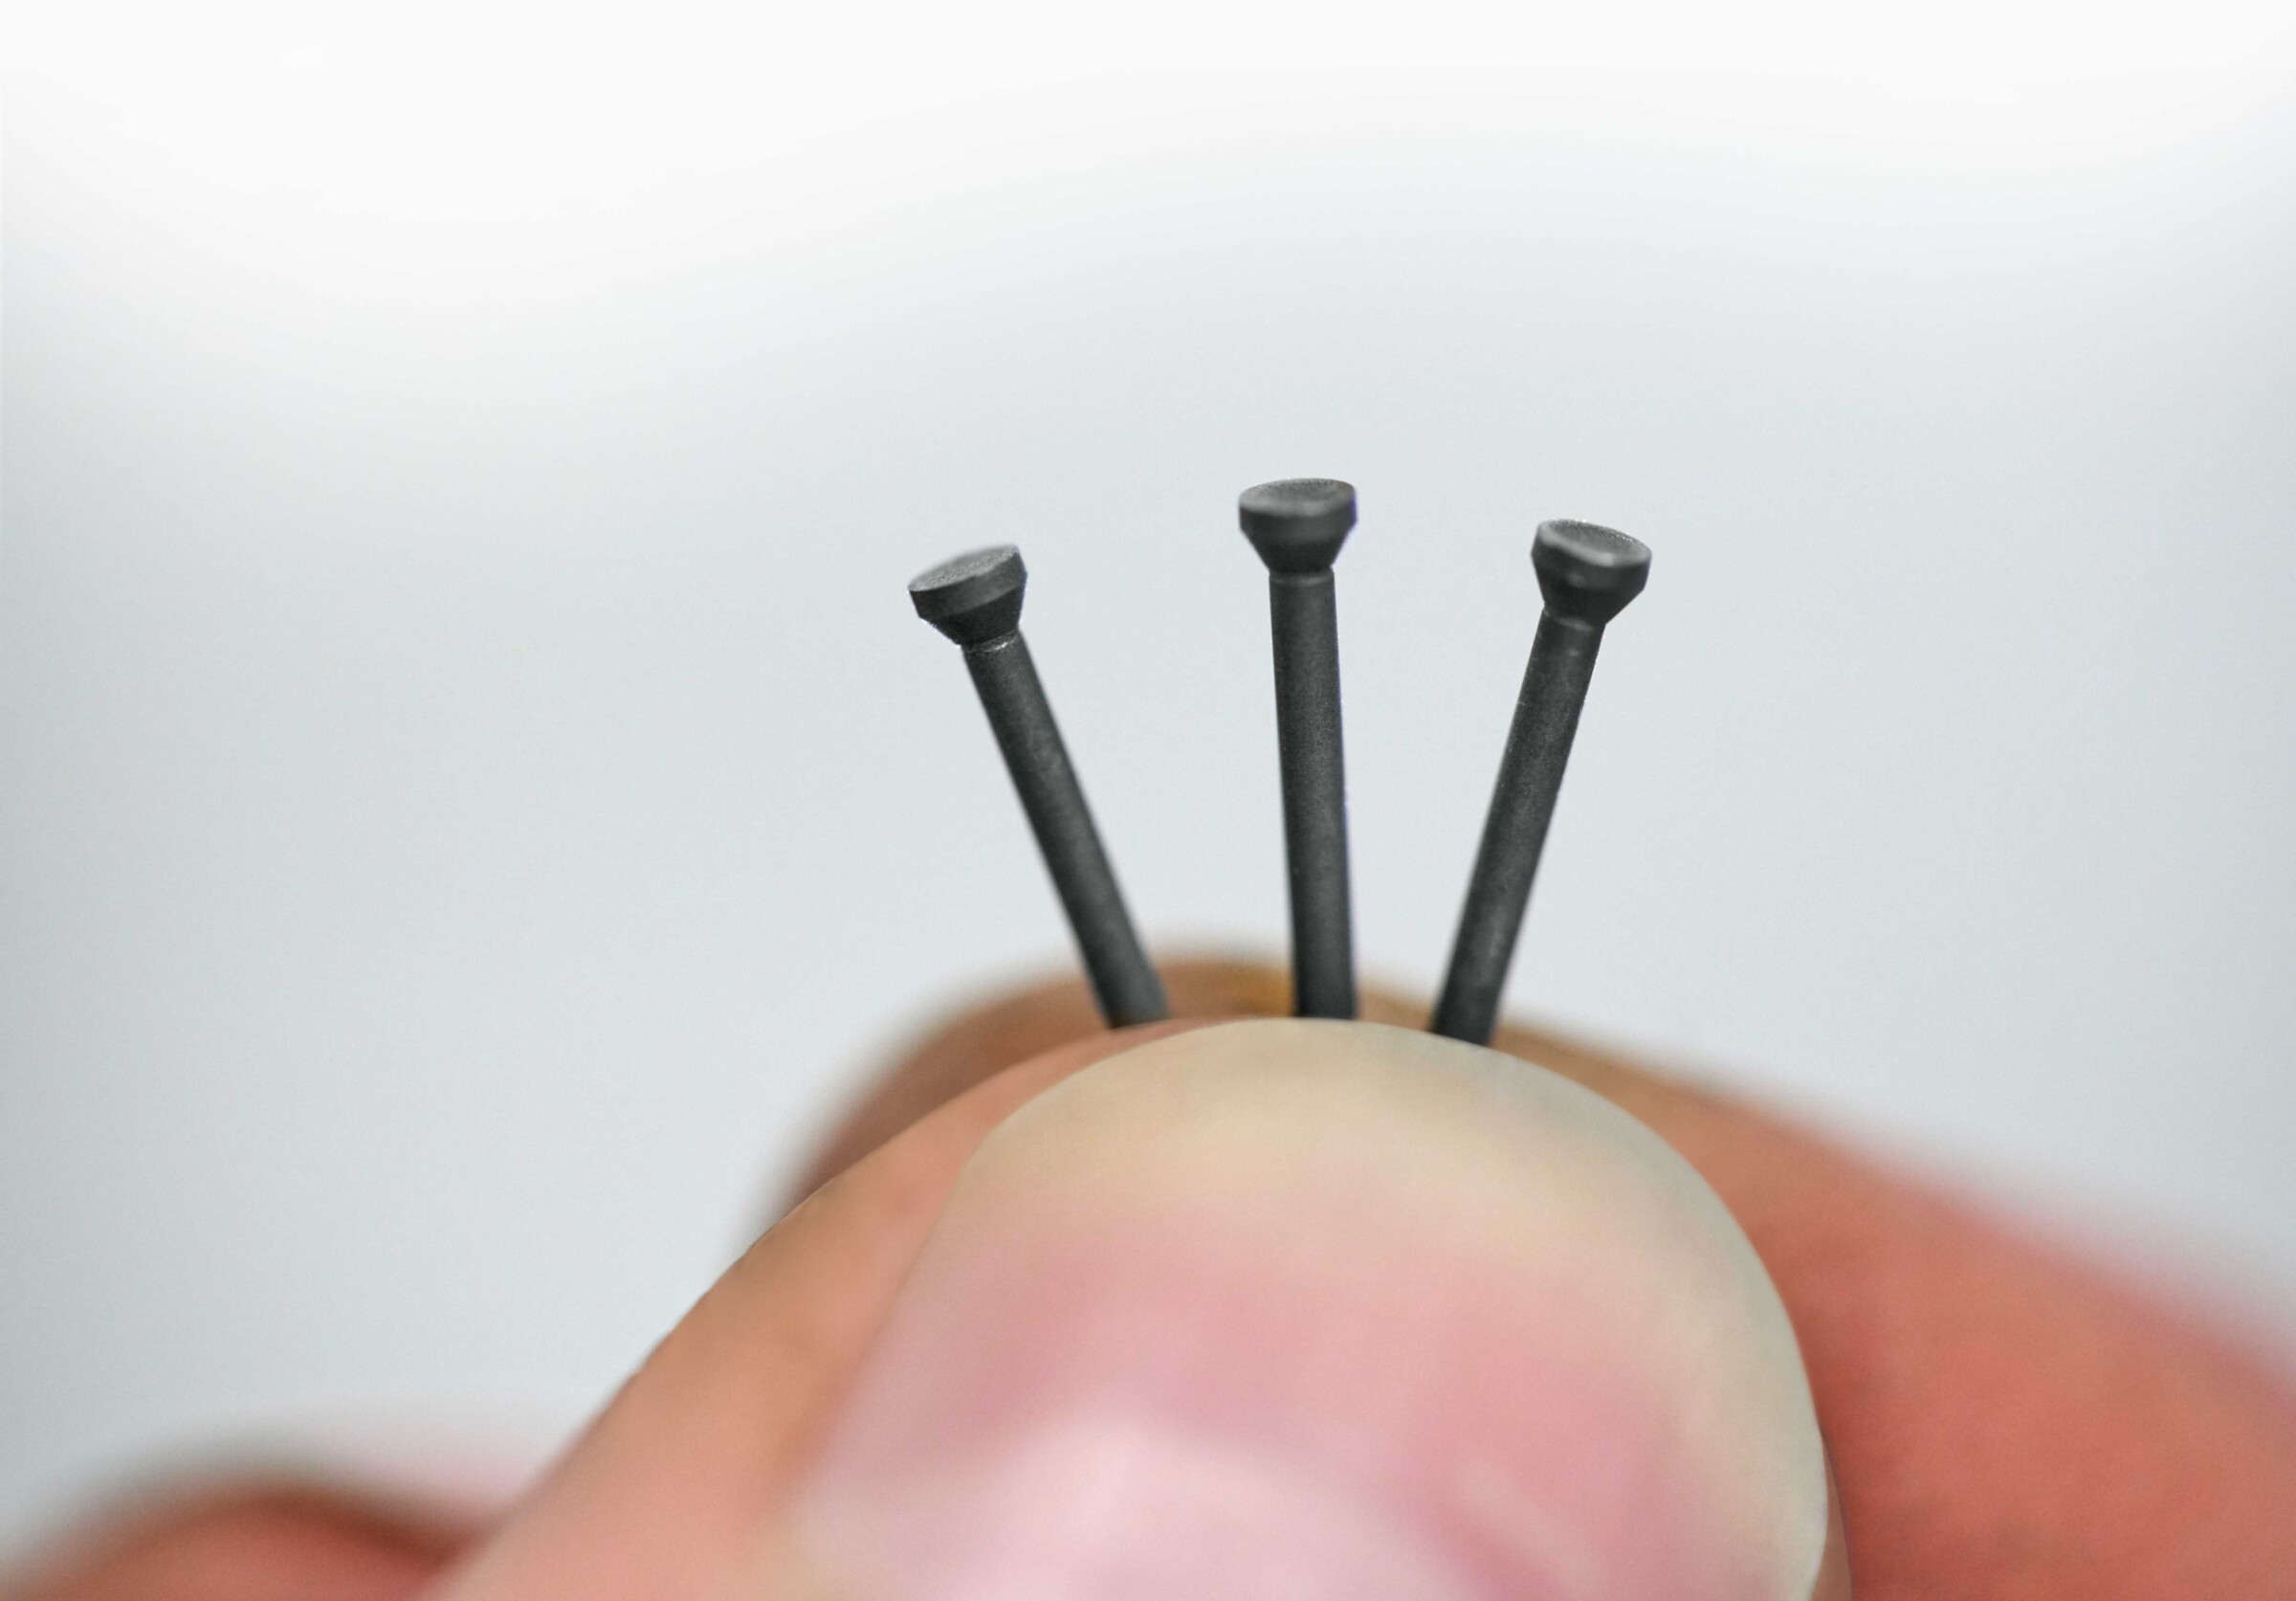 Ejector pins for injection moulds produced with 3 µm precision.